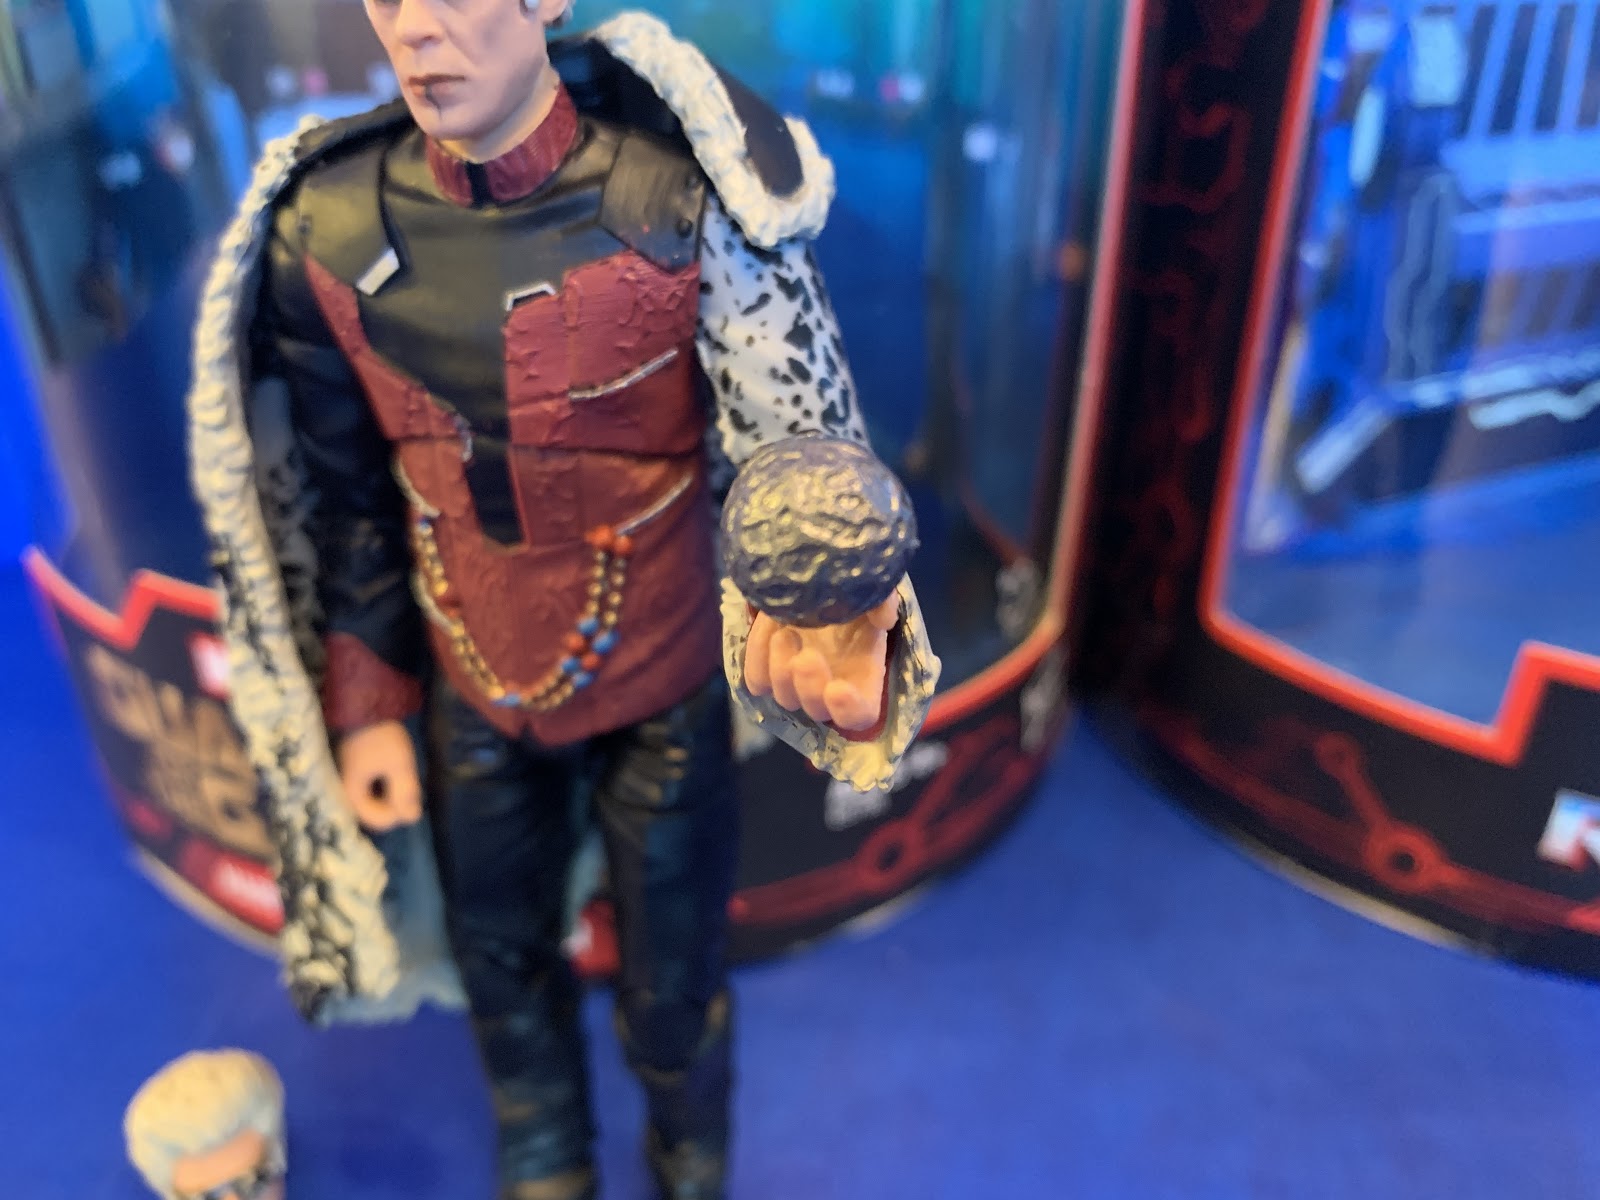 Marvel Legends: The Grandmaster and The Collector by Hasbro